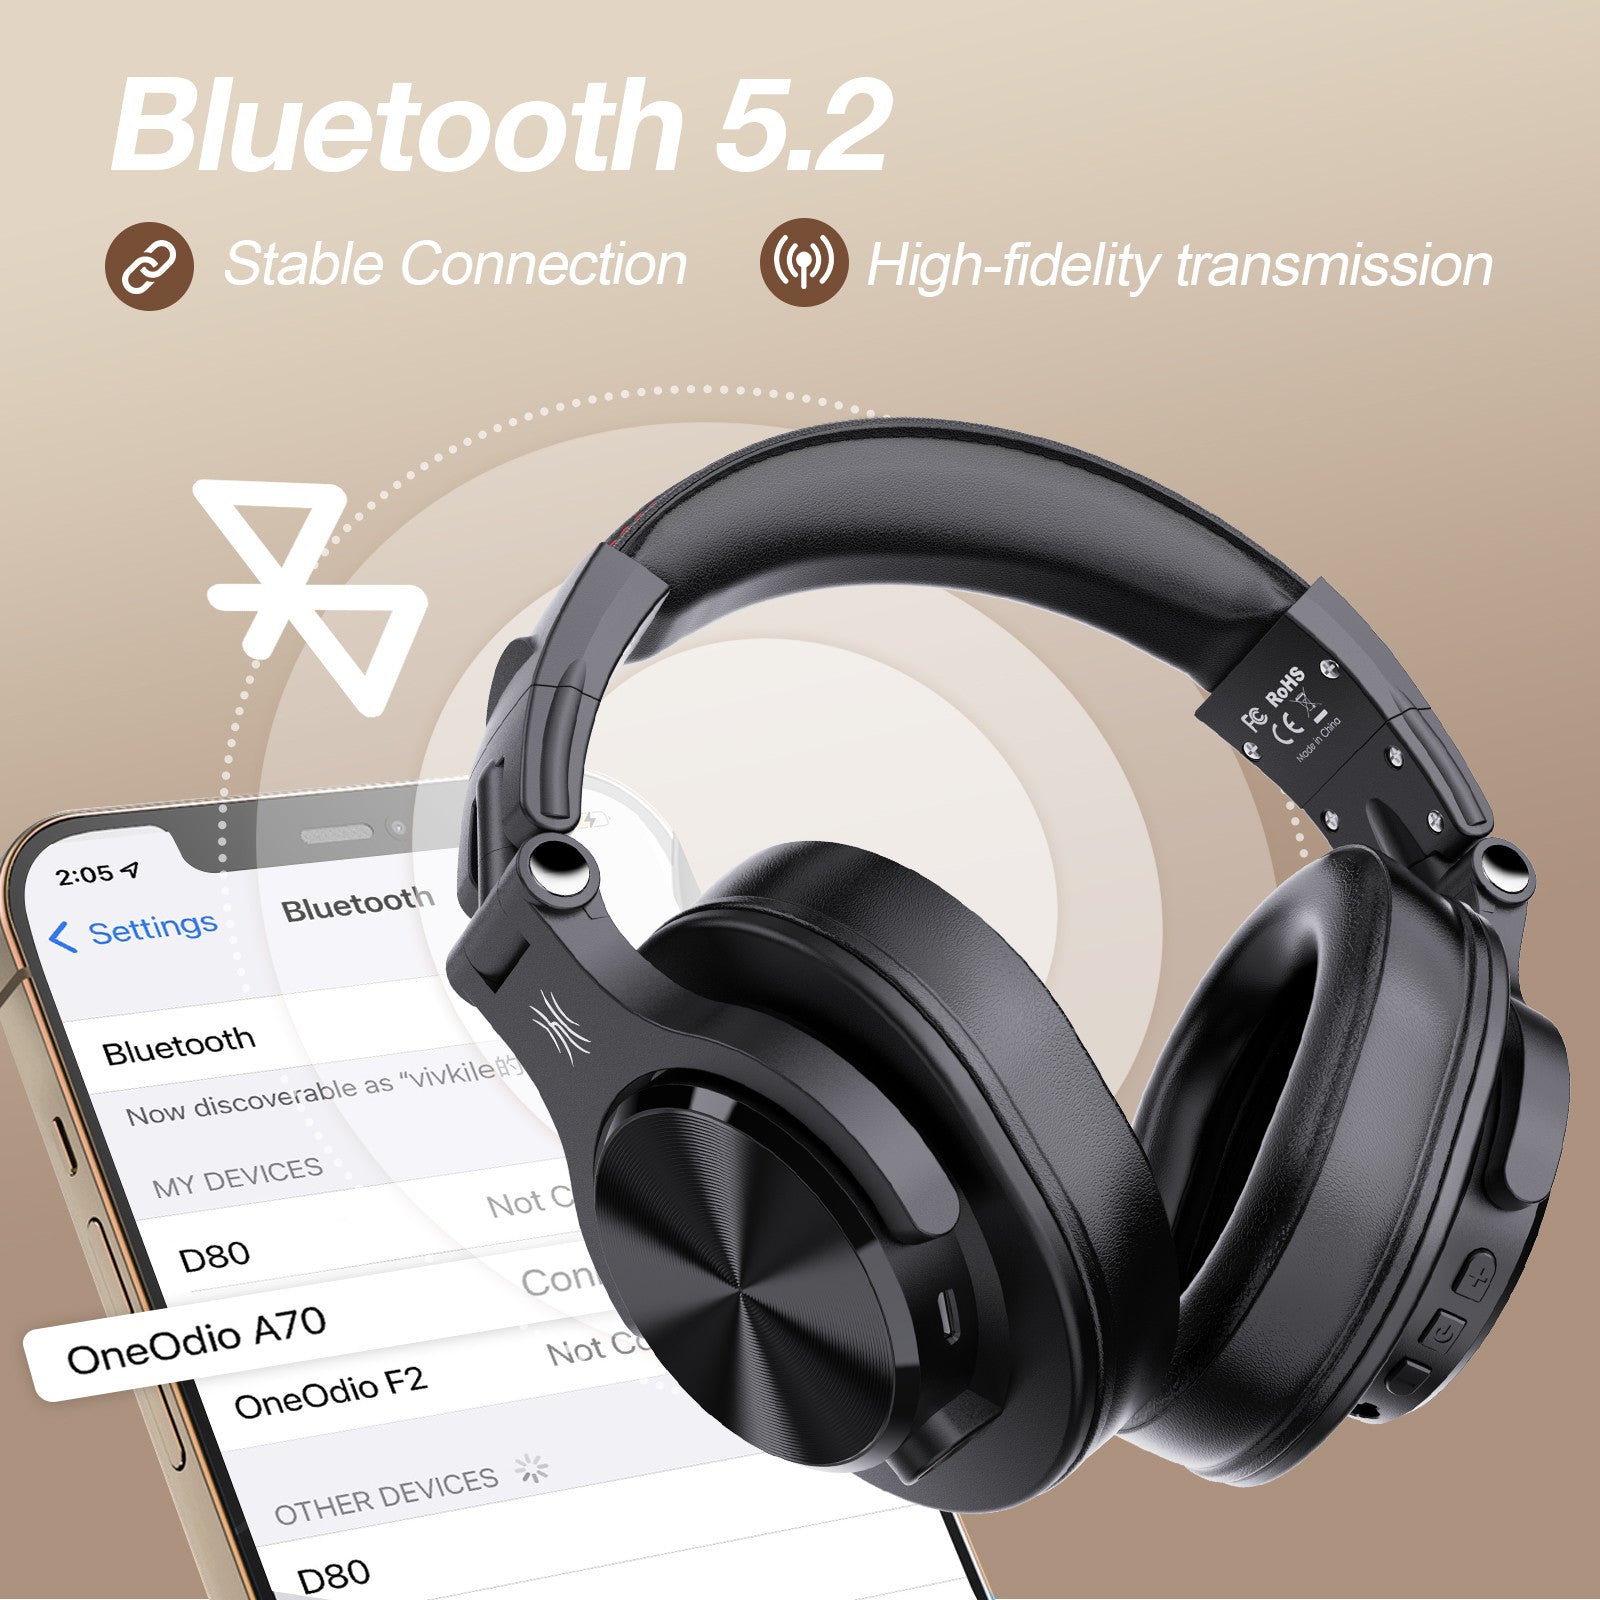 Oneodio A70 Fusion Wired & Wireless Headphones – techSavvy